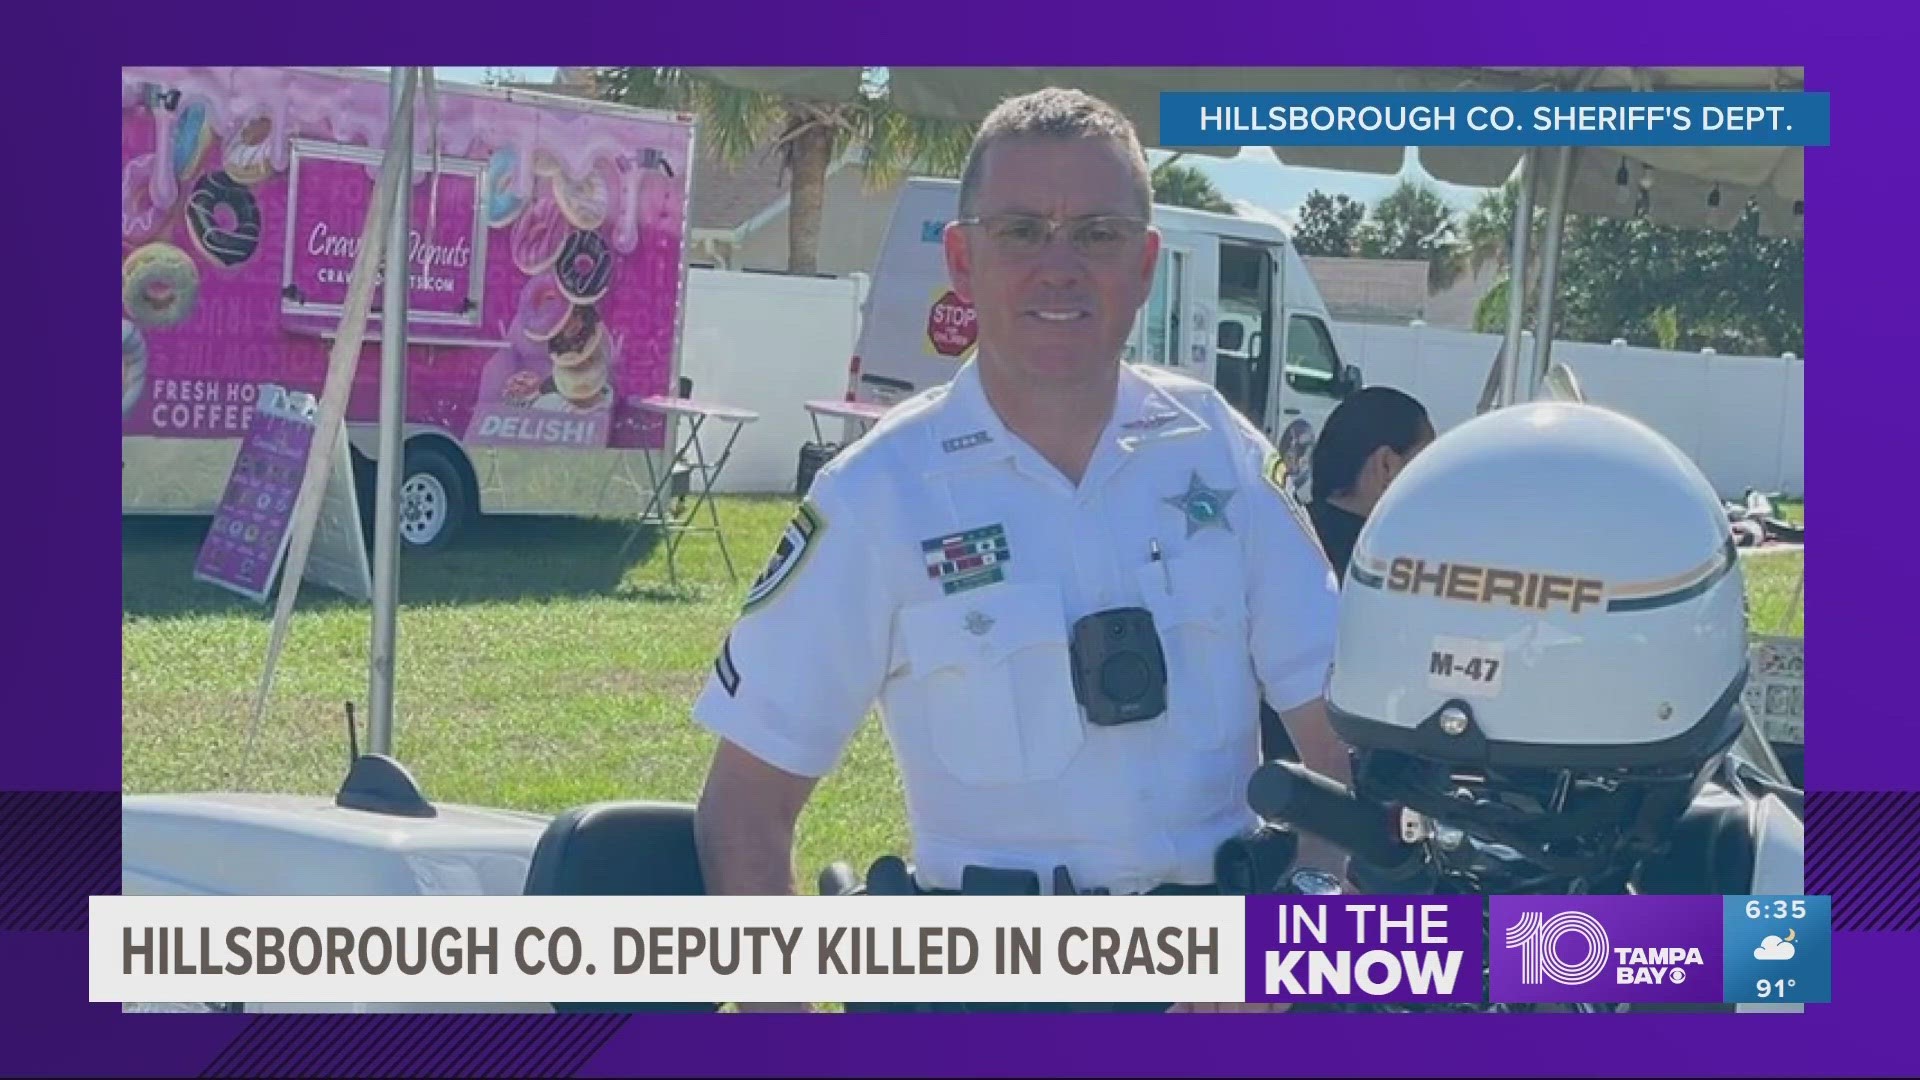 Master Deputy Robert Howard, 53, was traveling to a planned engagement before the tragic incident occurred, authorities say.